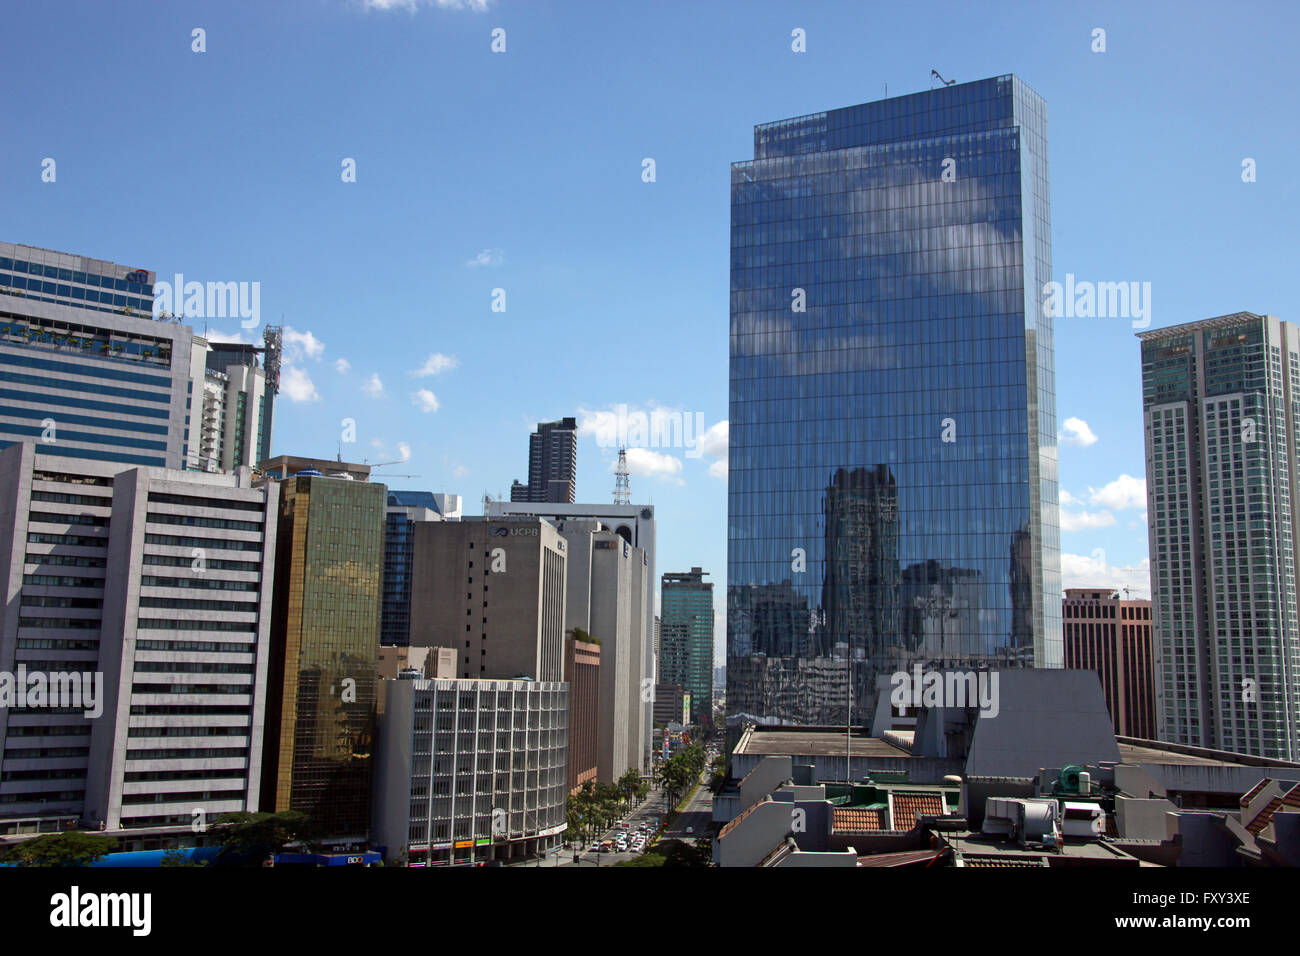 TALL BUILDINGS FROM PENINSULA HOTEL MANILA PHILIPPINES ASIA 18 April 2015 Stock Photo